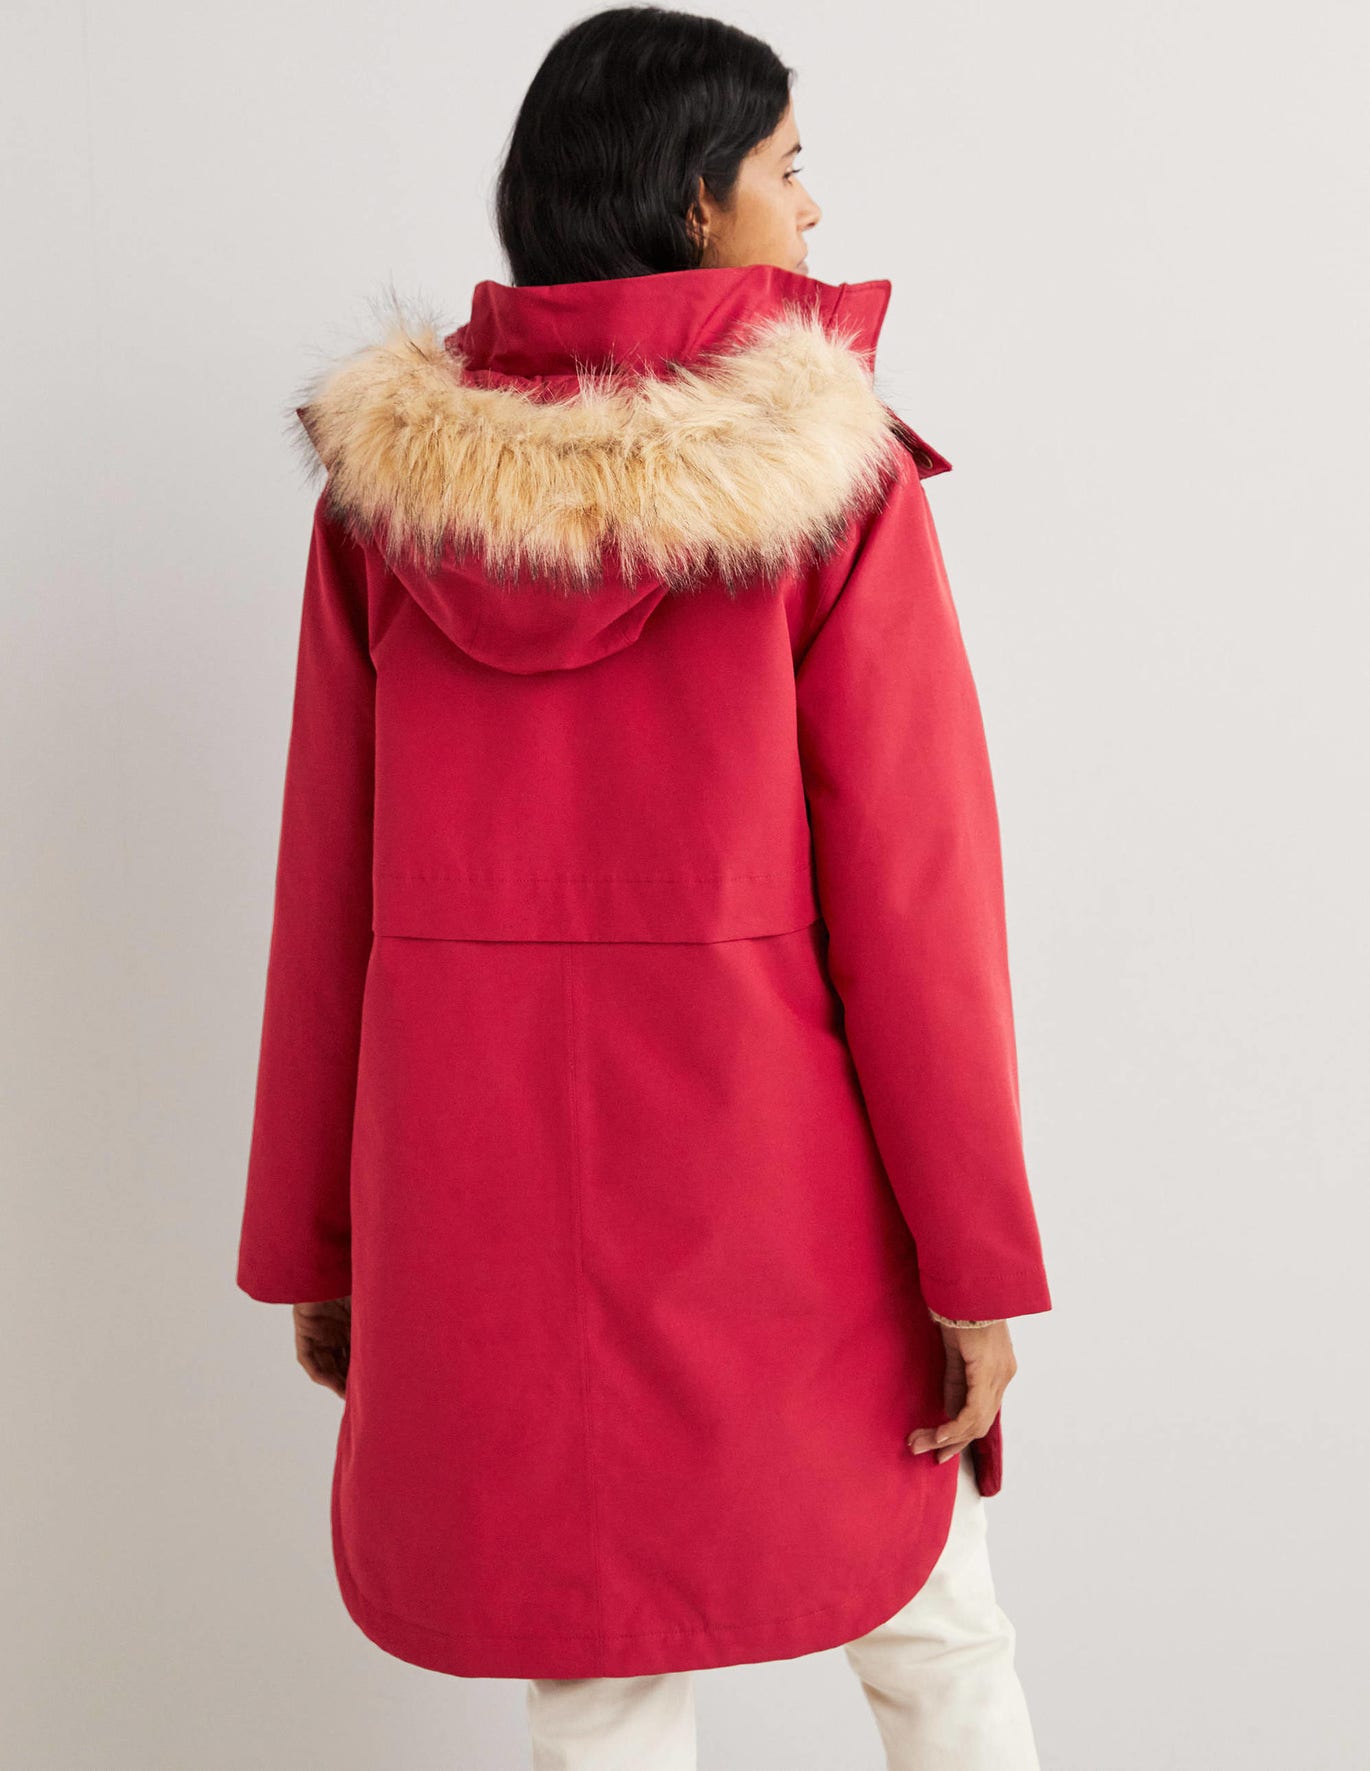 Boden Waterproof Borg Lined Parka - Russet Red